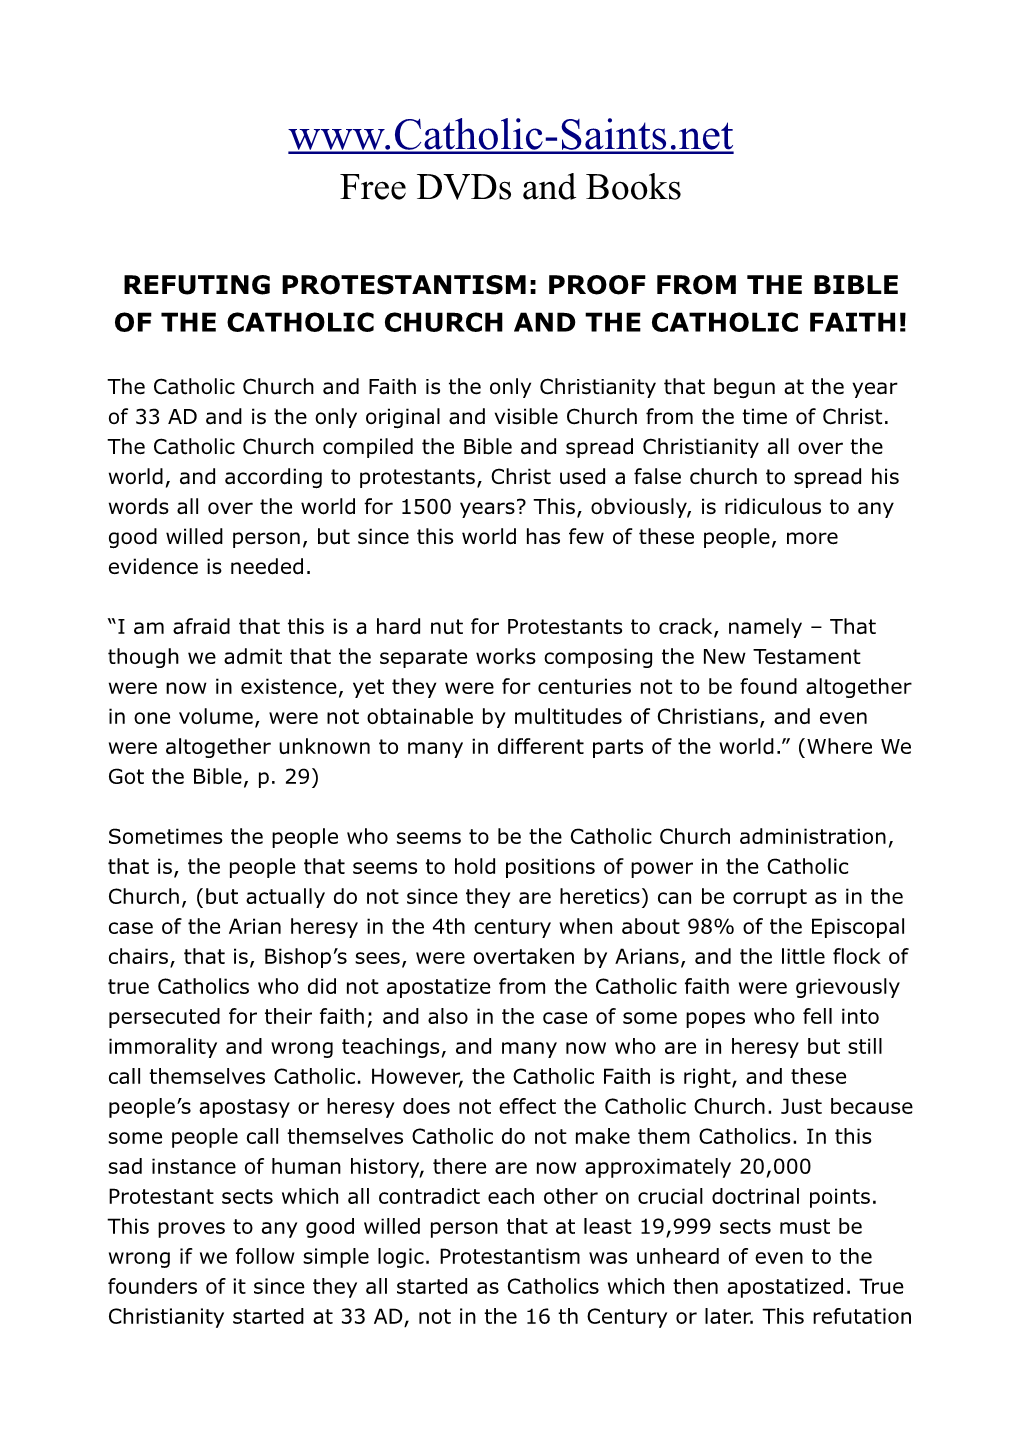 Refuting Protestantism: Proof from the Bible of the Catholic Church and the Catholic Faith!